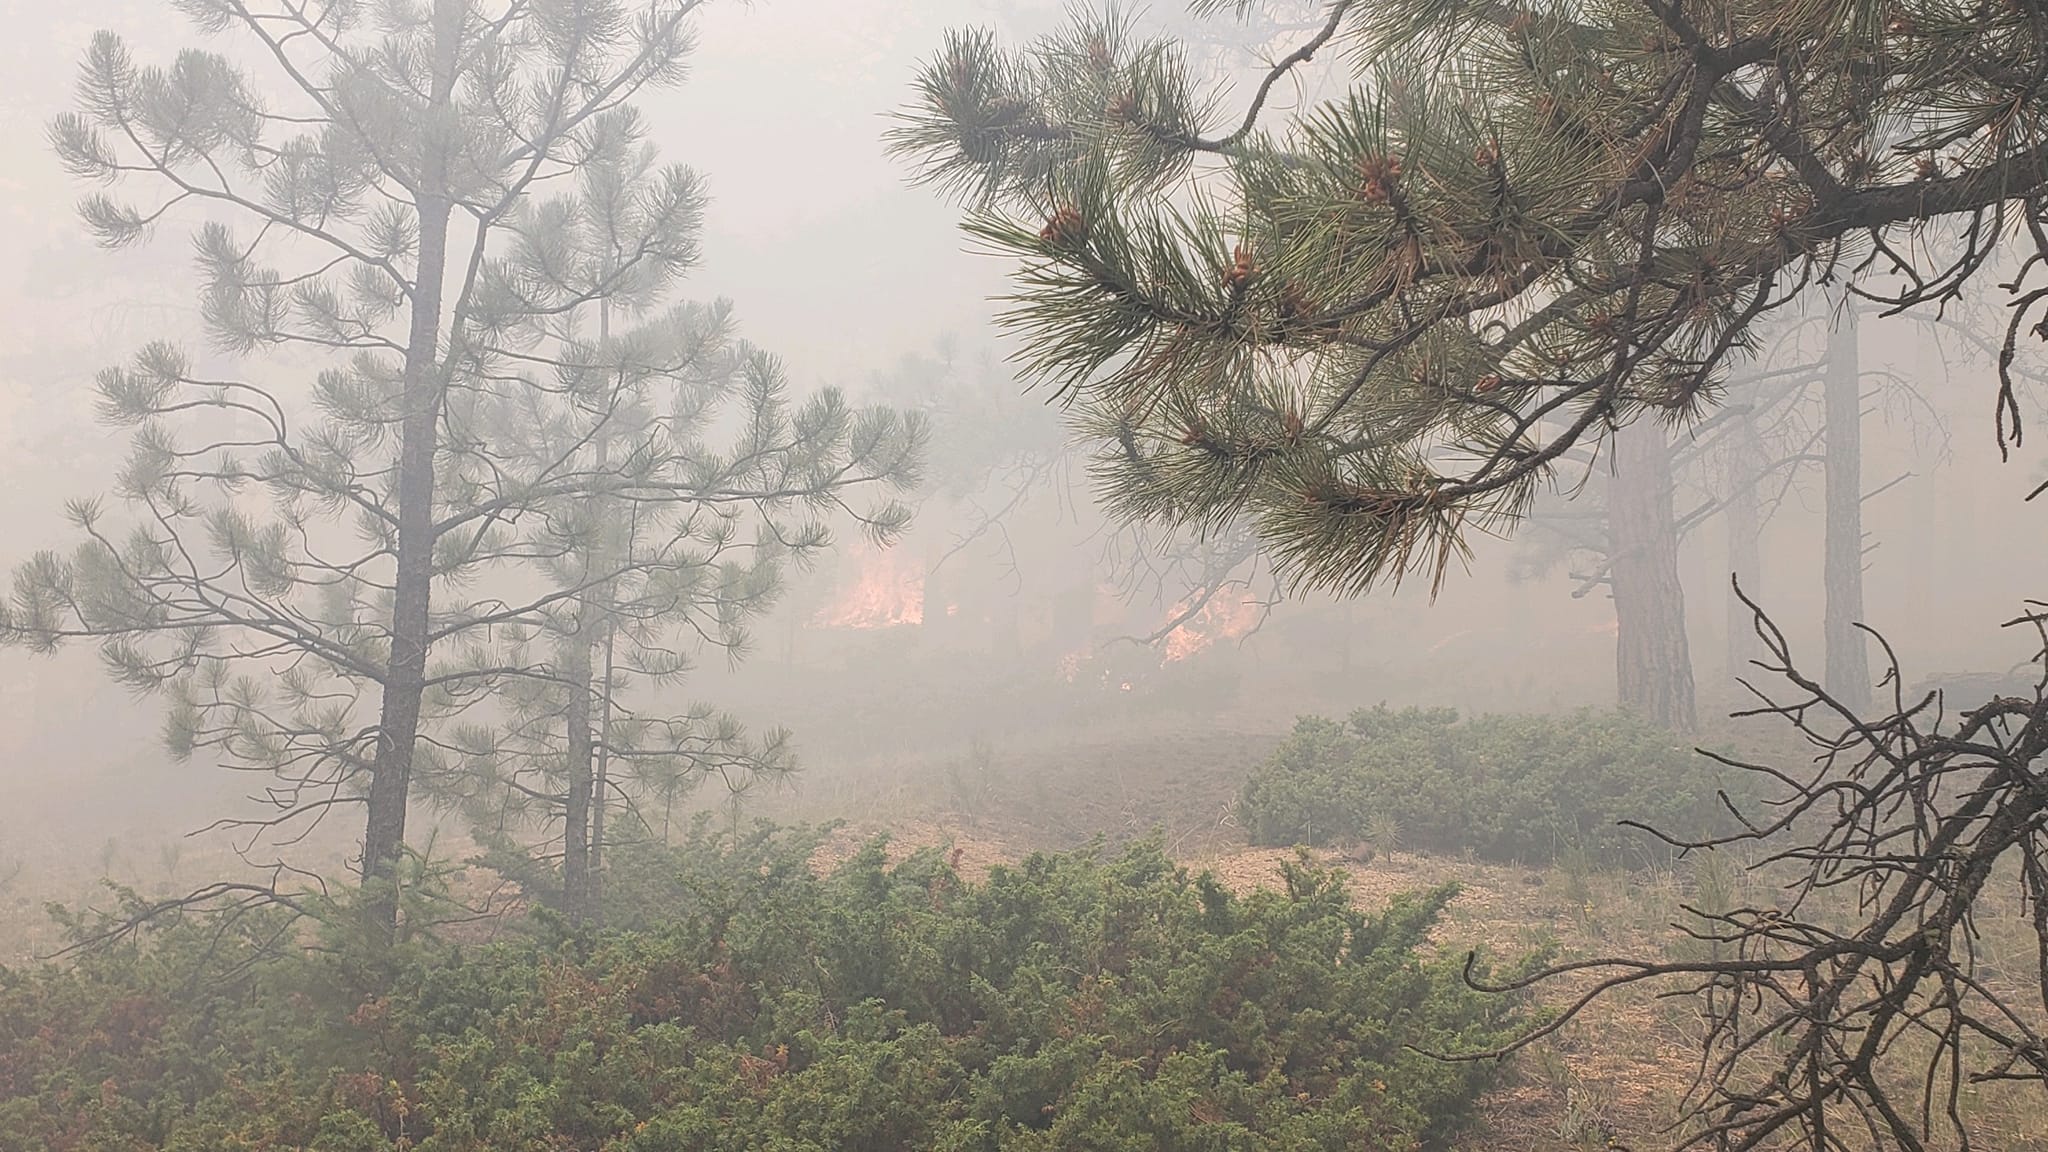 A pre-evacuation warning has been issued for Druid Hills Subdivision due to a wildland fire near Manchester Place.